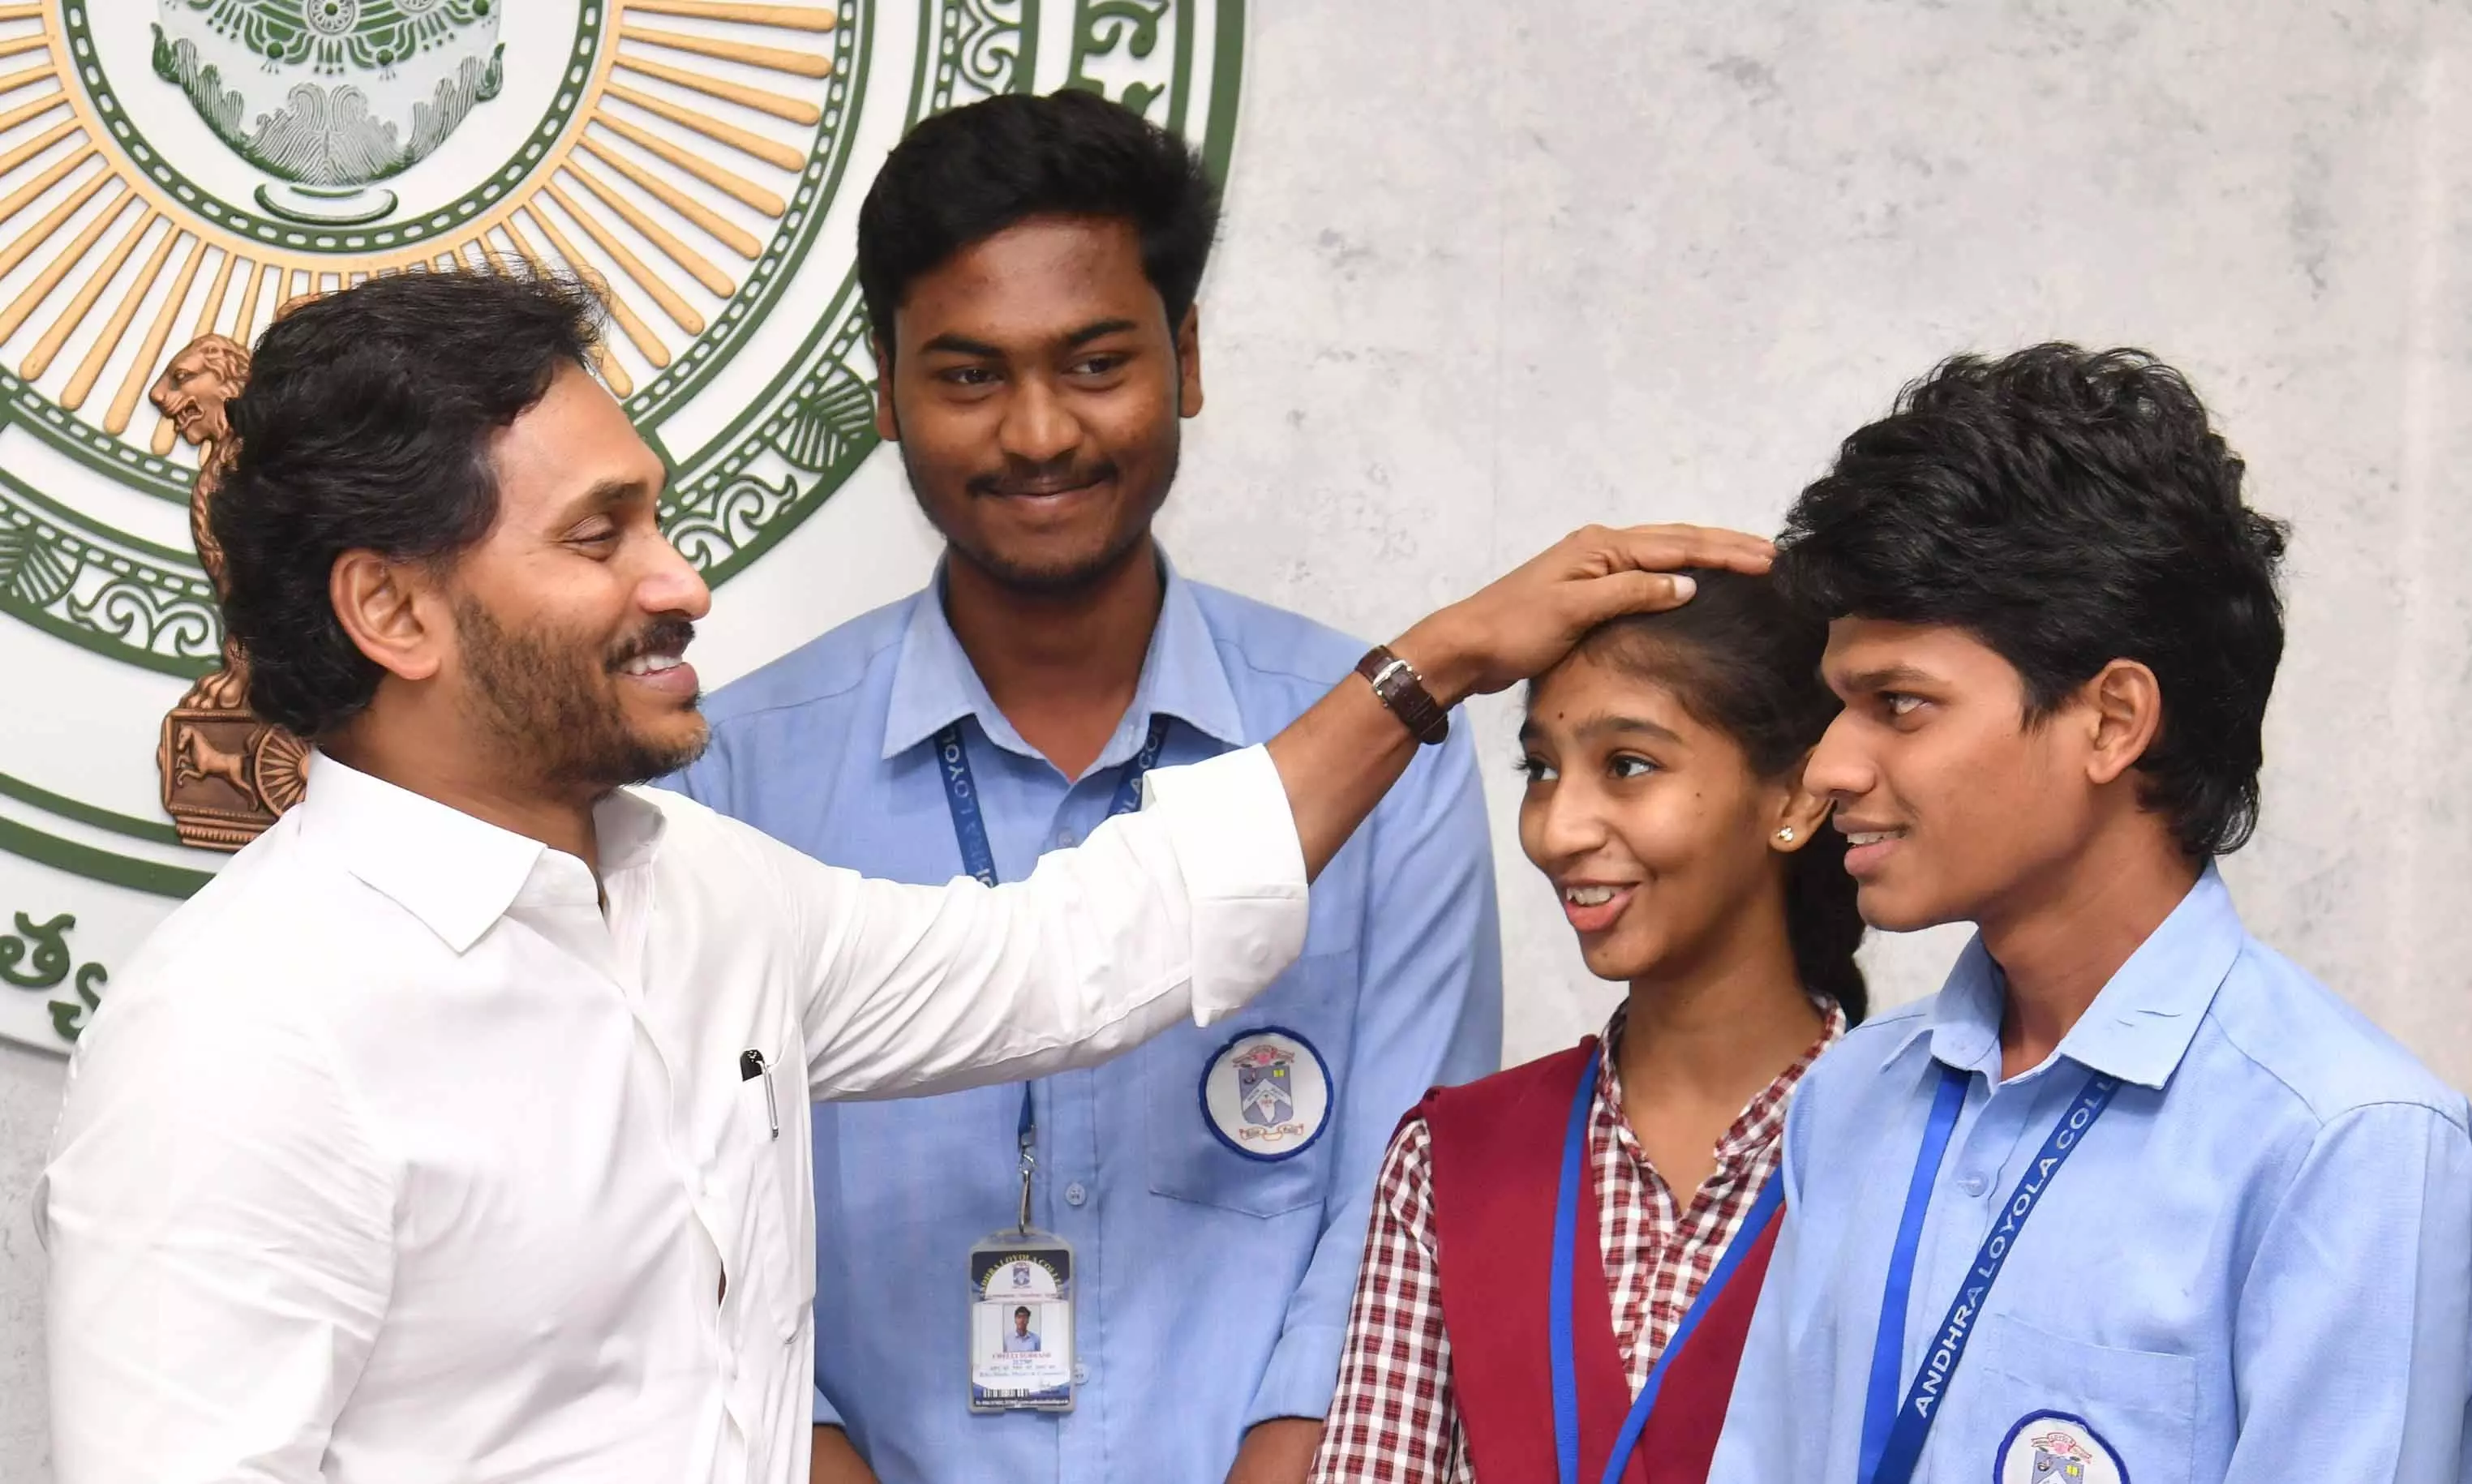 Right to Education is old slogan, Right to Quality Education is aimed at: CM Jagan